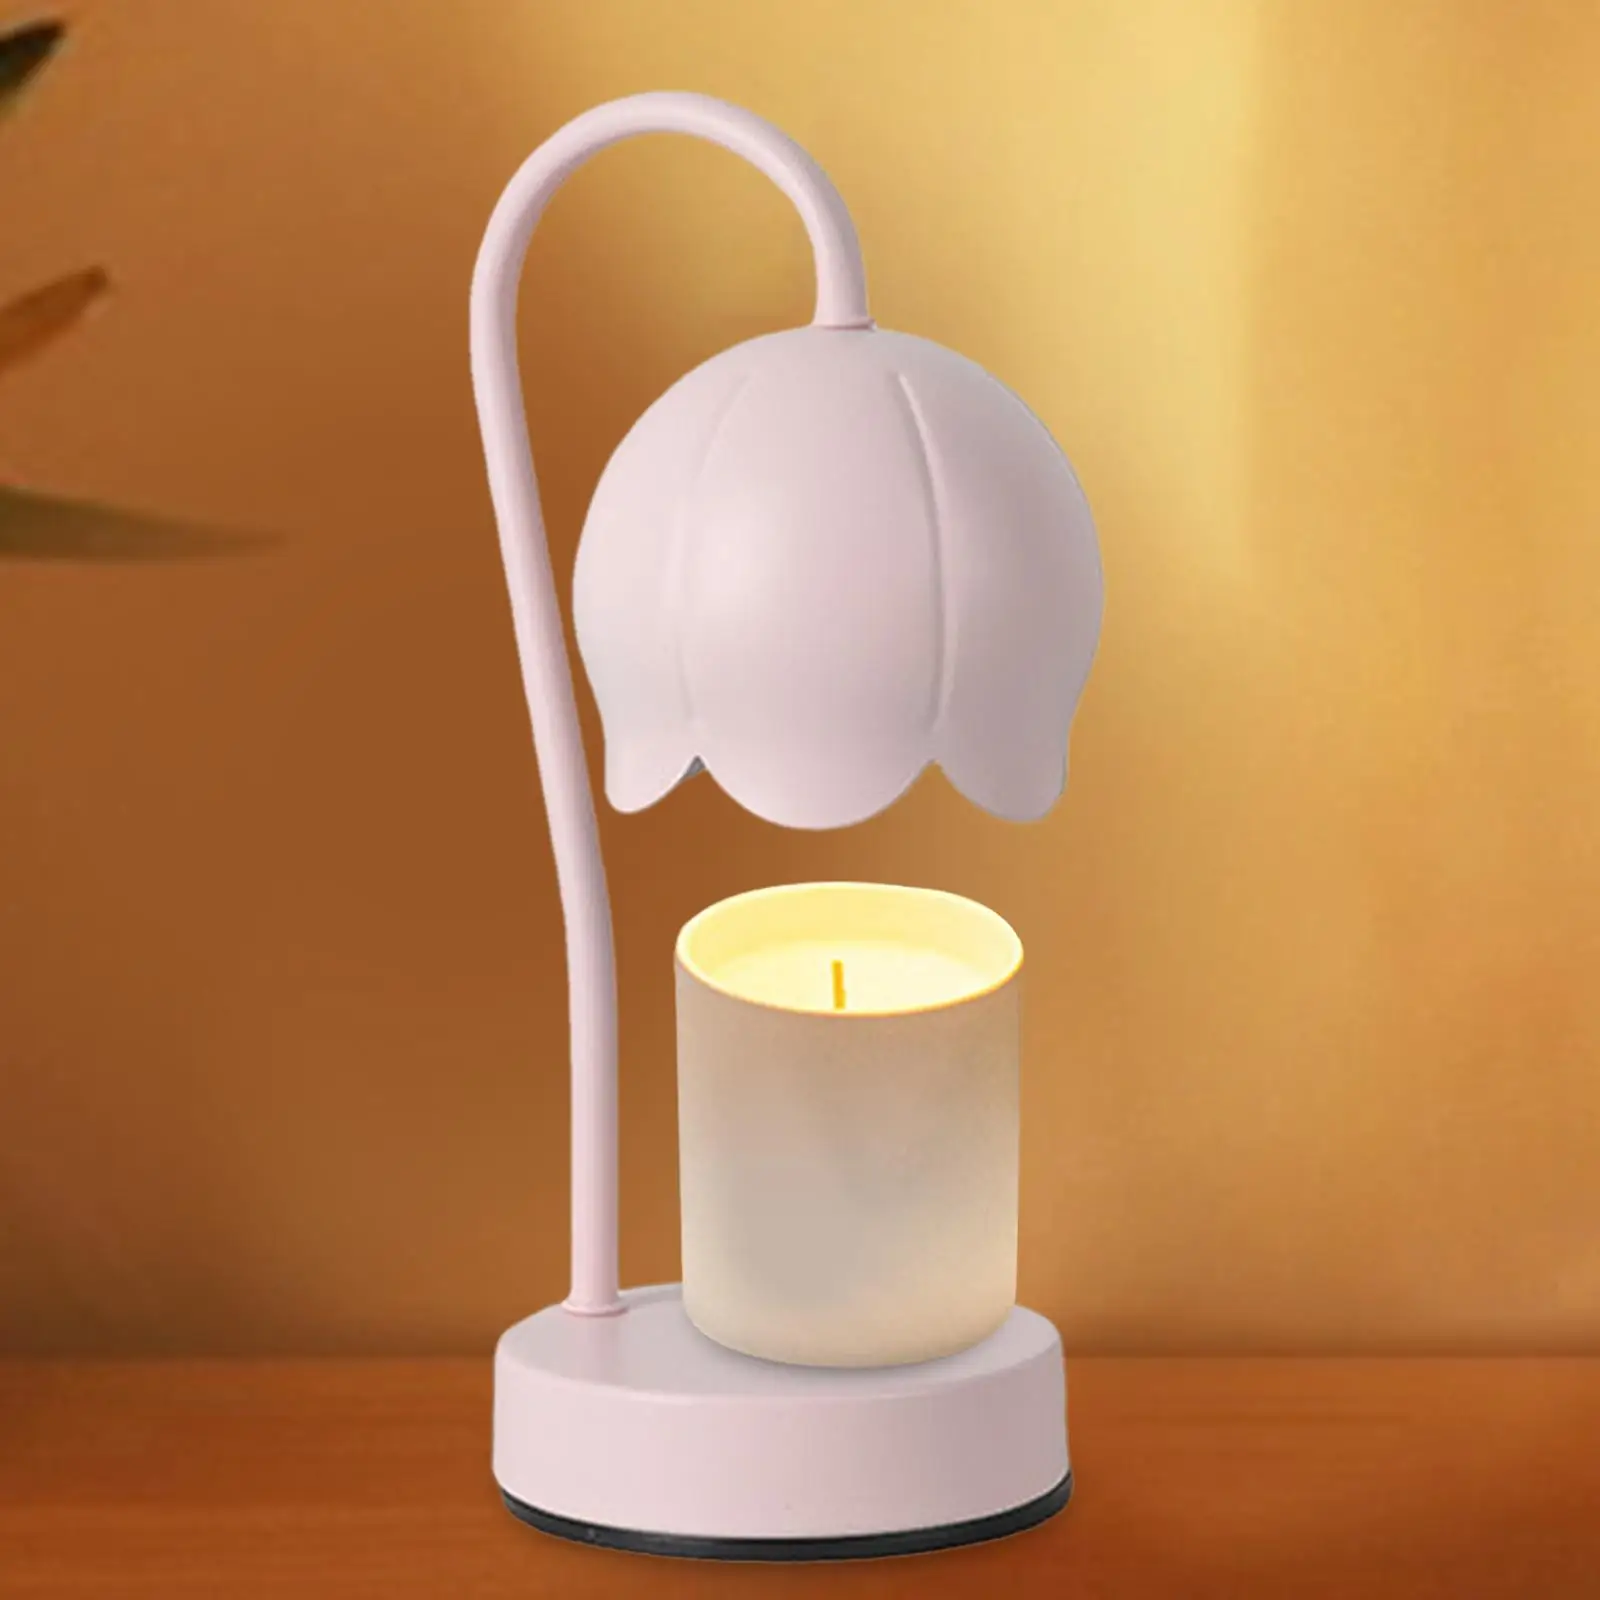 Electric Candle Warmer Lamp Desk Light Burner Lamp Ornament for Jar Candles Candle Heater Lamp for Cafe Centerpiece Gift